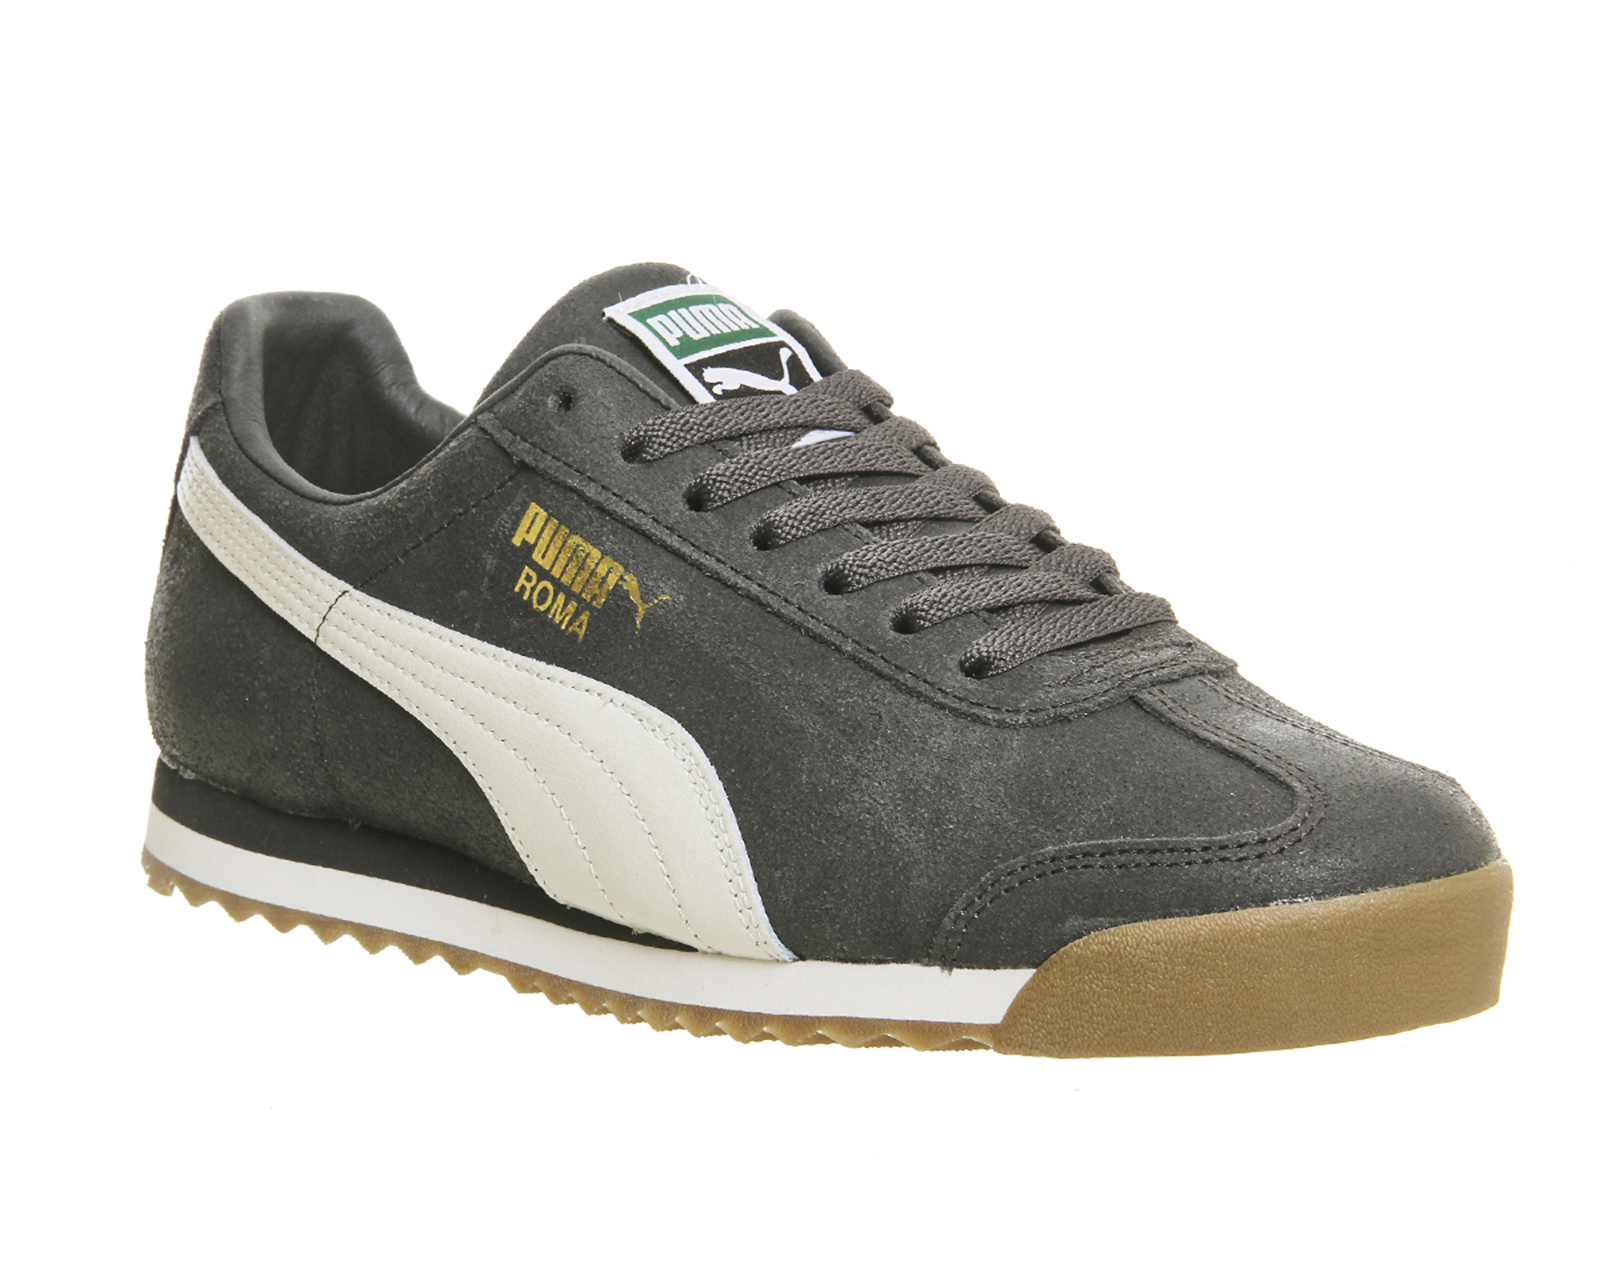 Puma Roma Distressed Charcoal Whisper White - His Exclusives